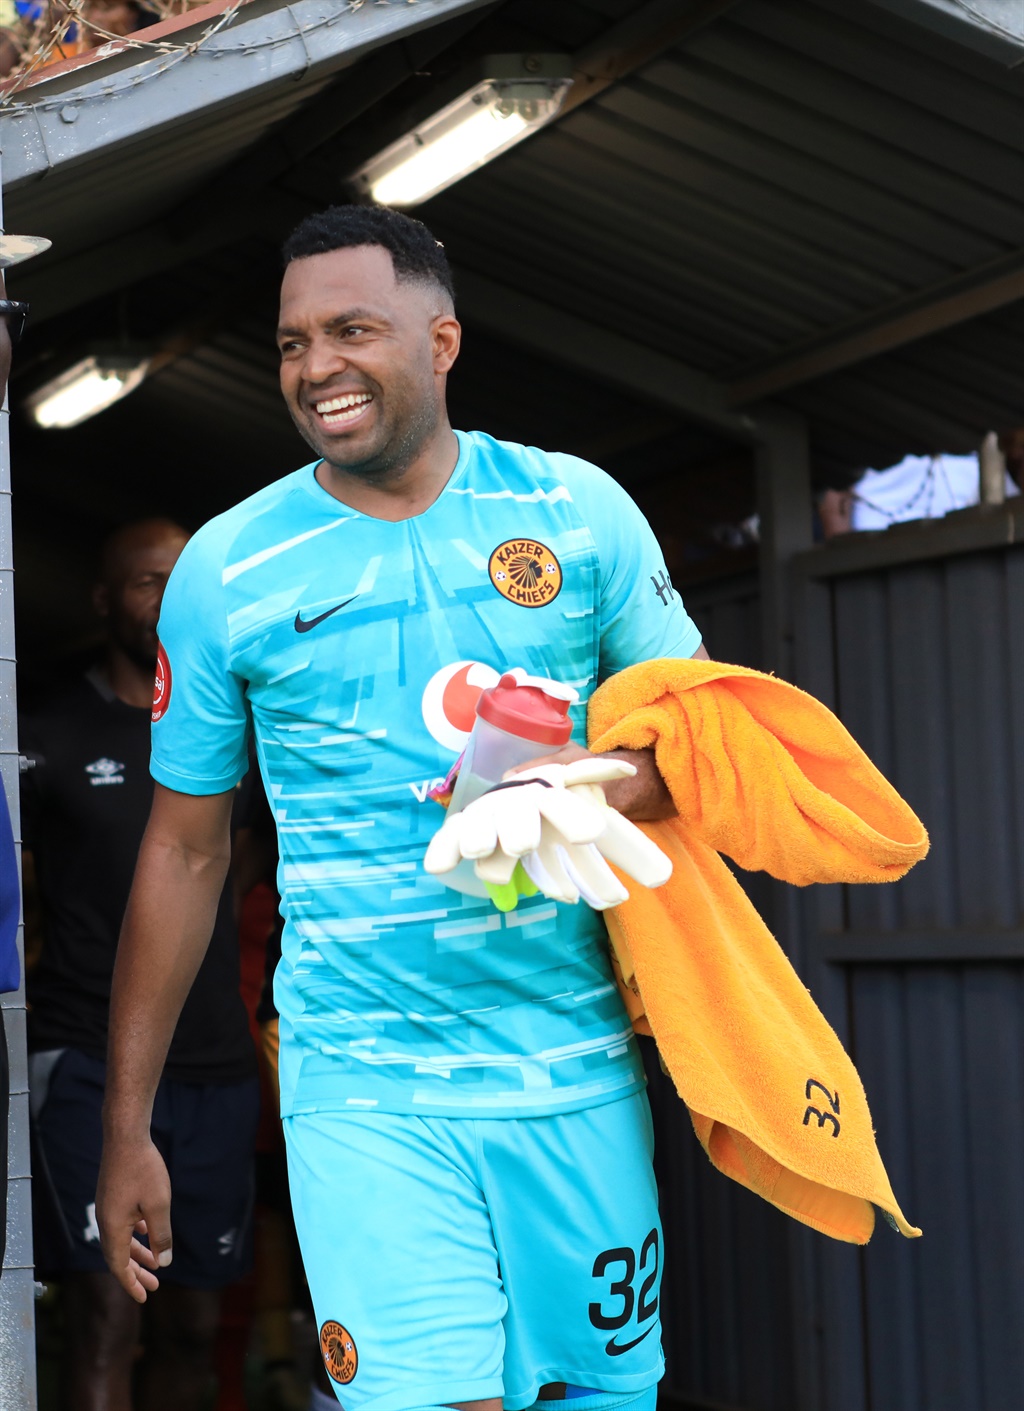 Itumeleng Khune of Kaizer Chiefs during the Absa Premiership 2019/20 game between Black Leopards and Kaizer Chiefs at Thohoyandou Stadium in Thohoyandou,Limpopo the on 18 January 2020 © Kabelo Leputu/BackpagePix